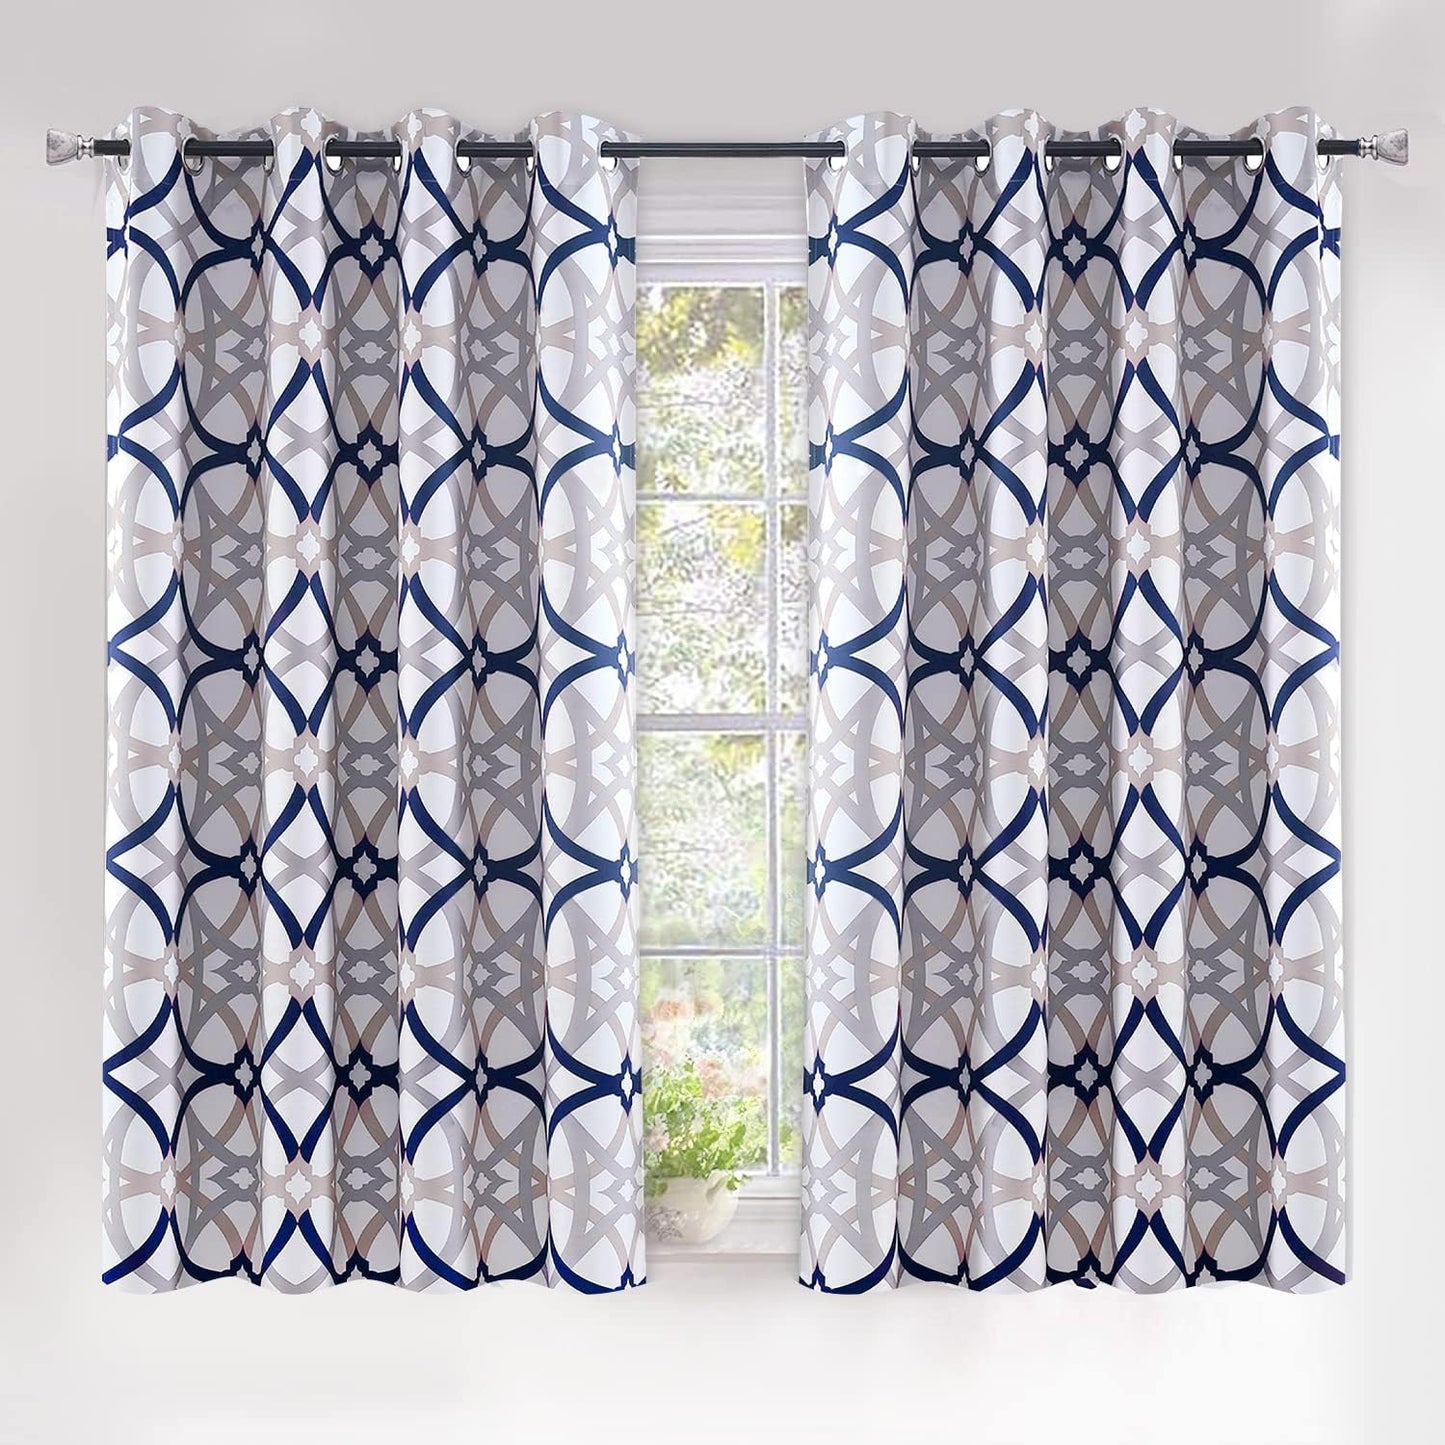 Driftaway Alexander Thermal Blackout Grommet Unlined Window Curtains Spiral Geo Trellis Pattern Set of 2 Panels Each Size 52 Inch by 84 Inch Red and Gray  DriftAway Navy/Gray 52''X54'' 